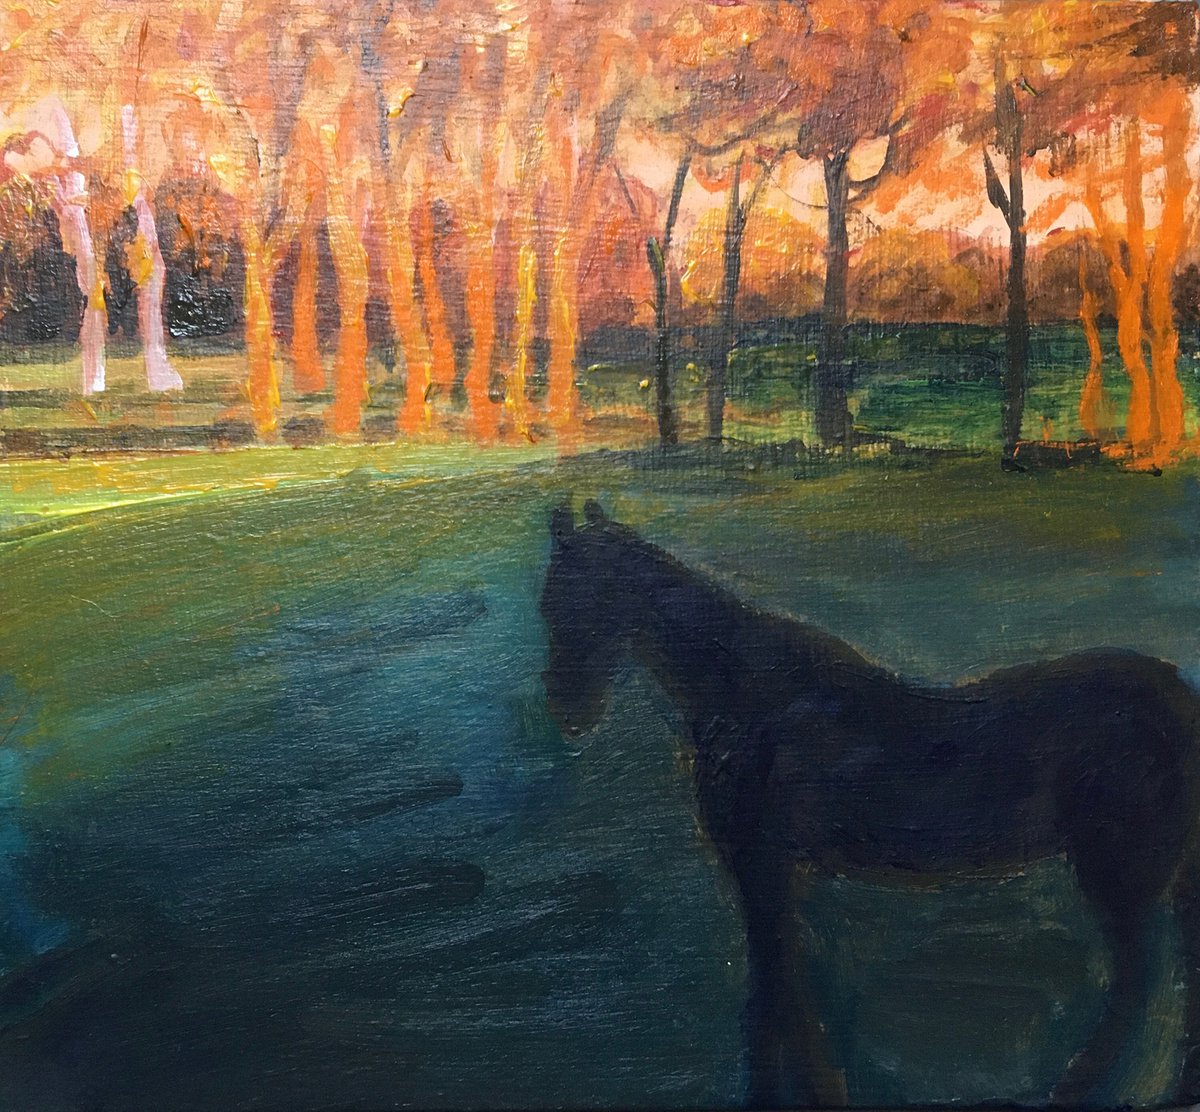 horse watching trees at sunset by Ren Goorman